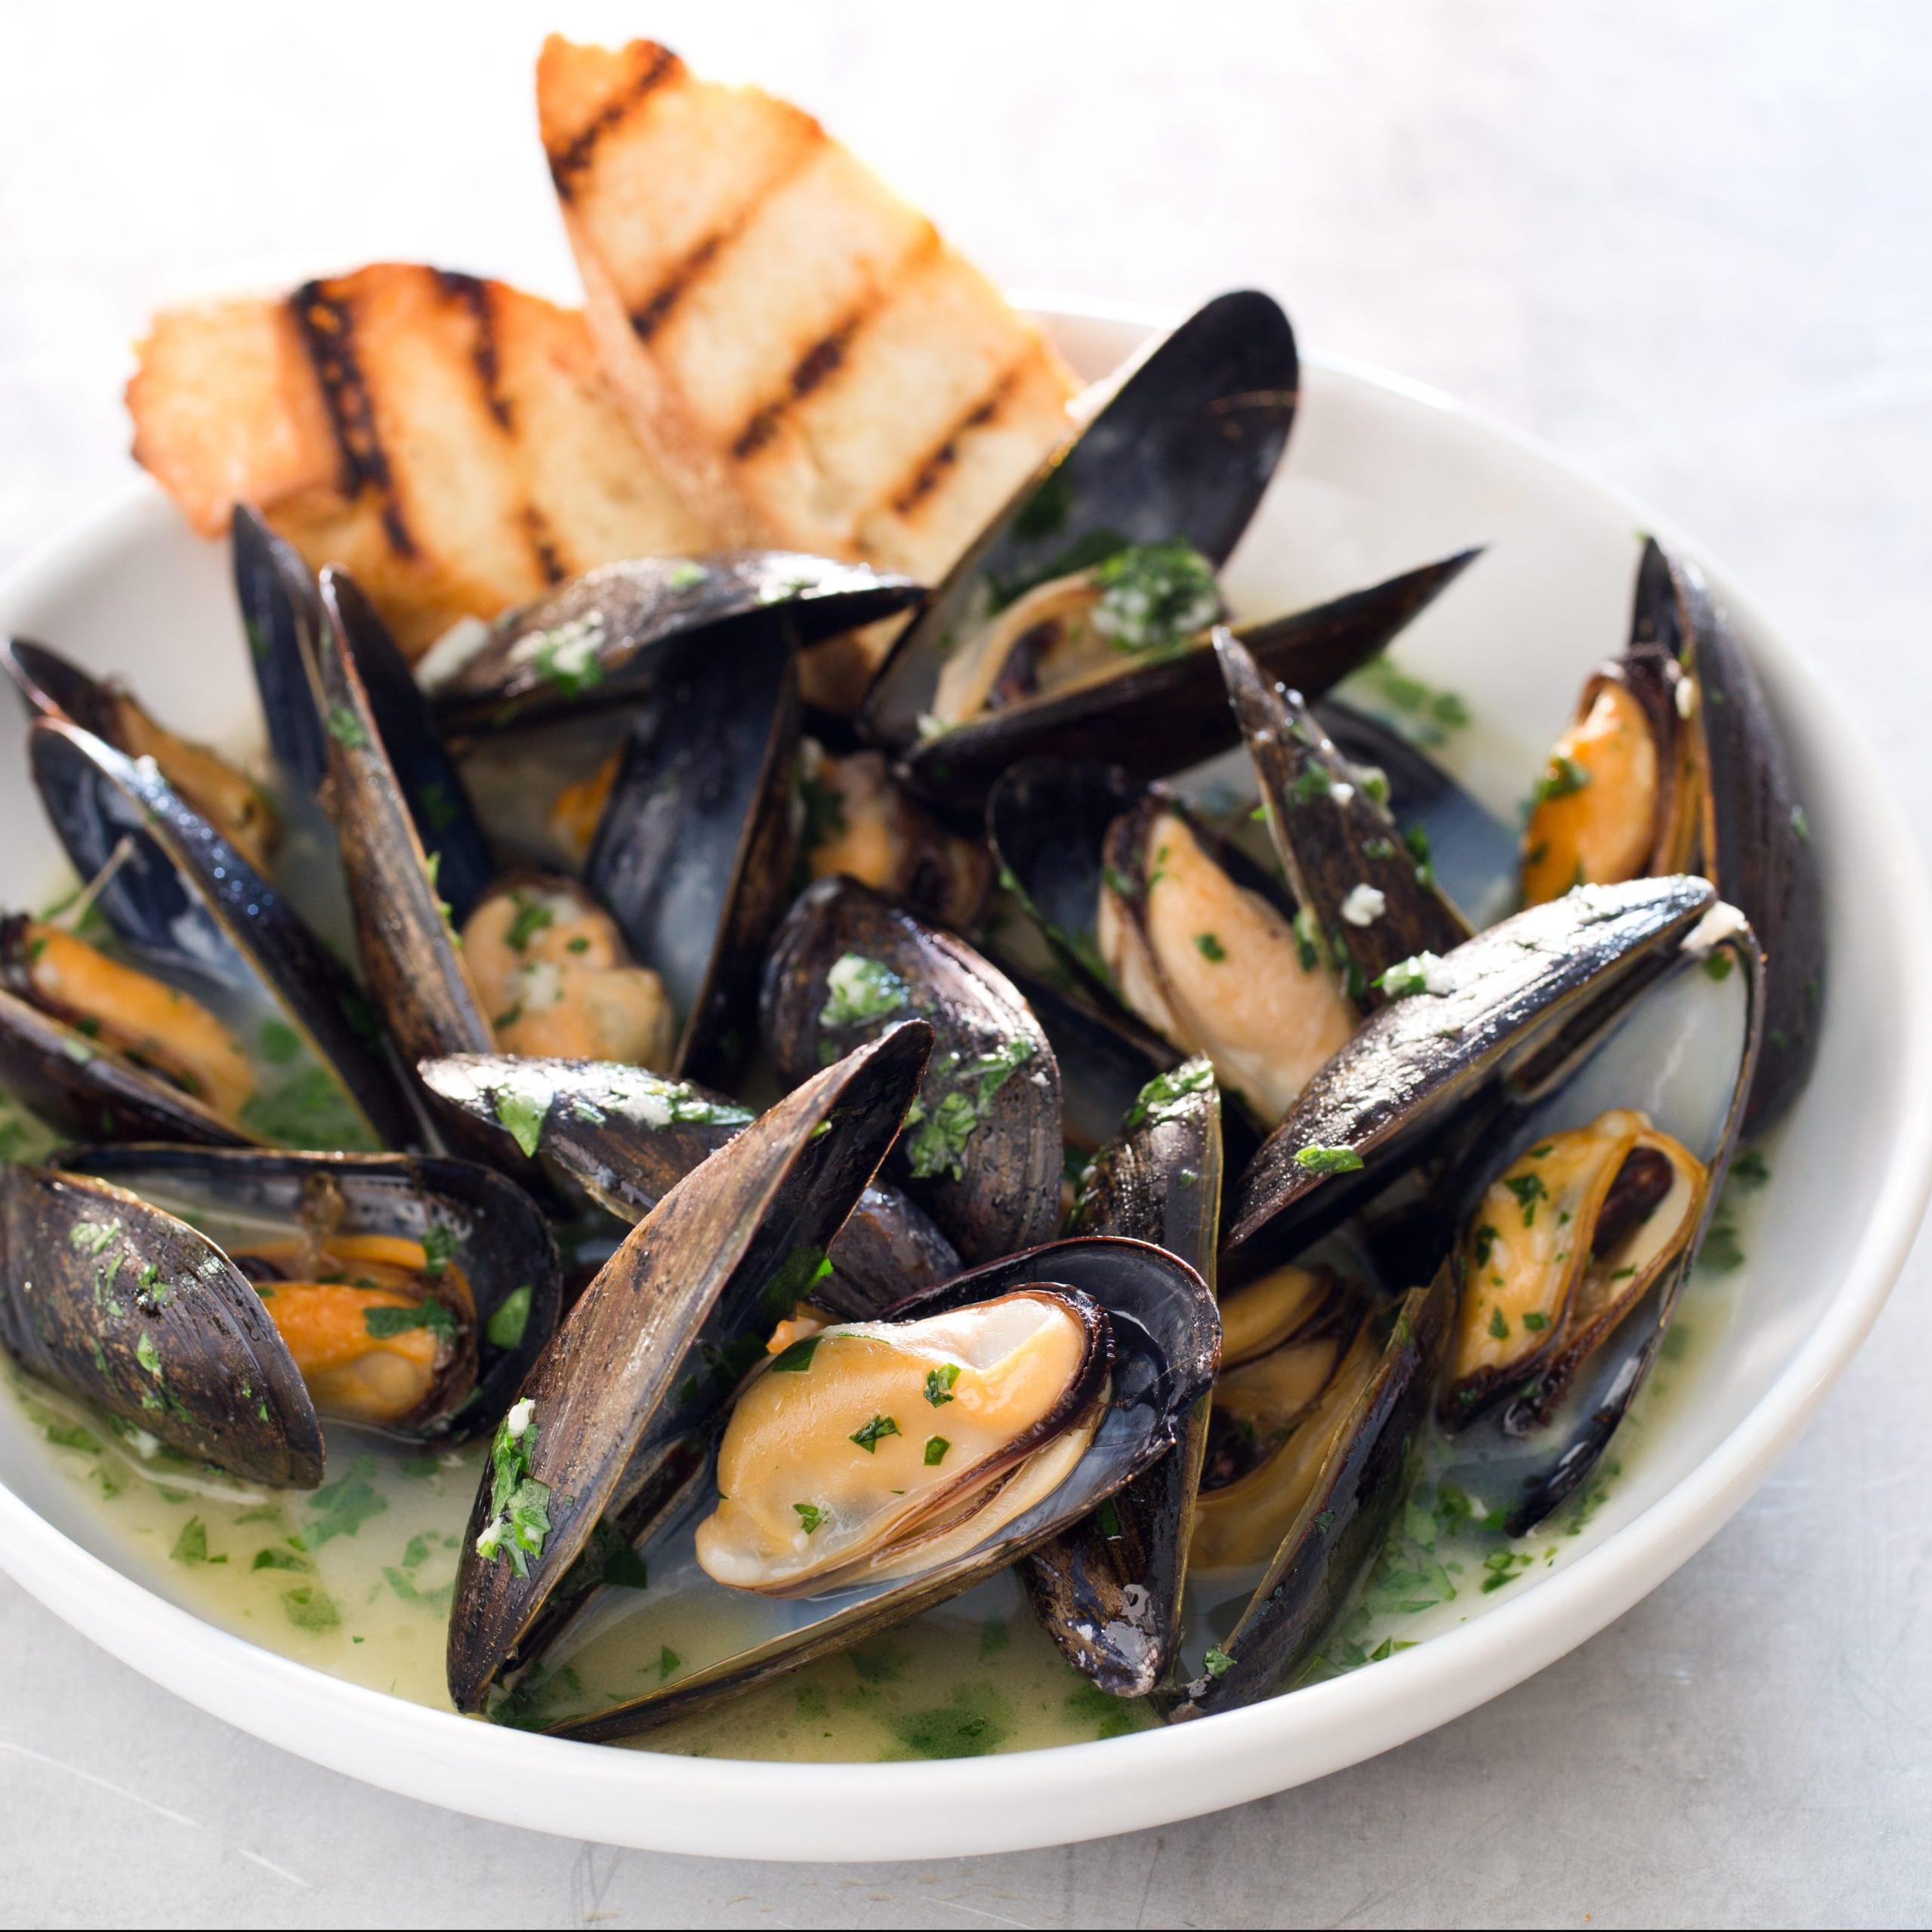  A warm loaf of crusty bread is perfect for soaking up the white wine and garlic broth these mussels sit in!